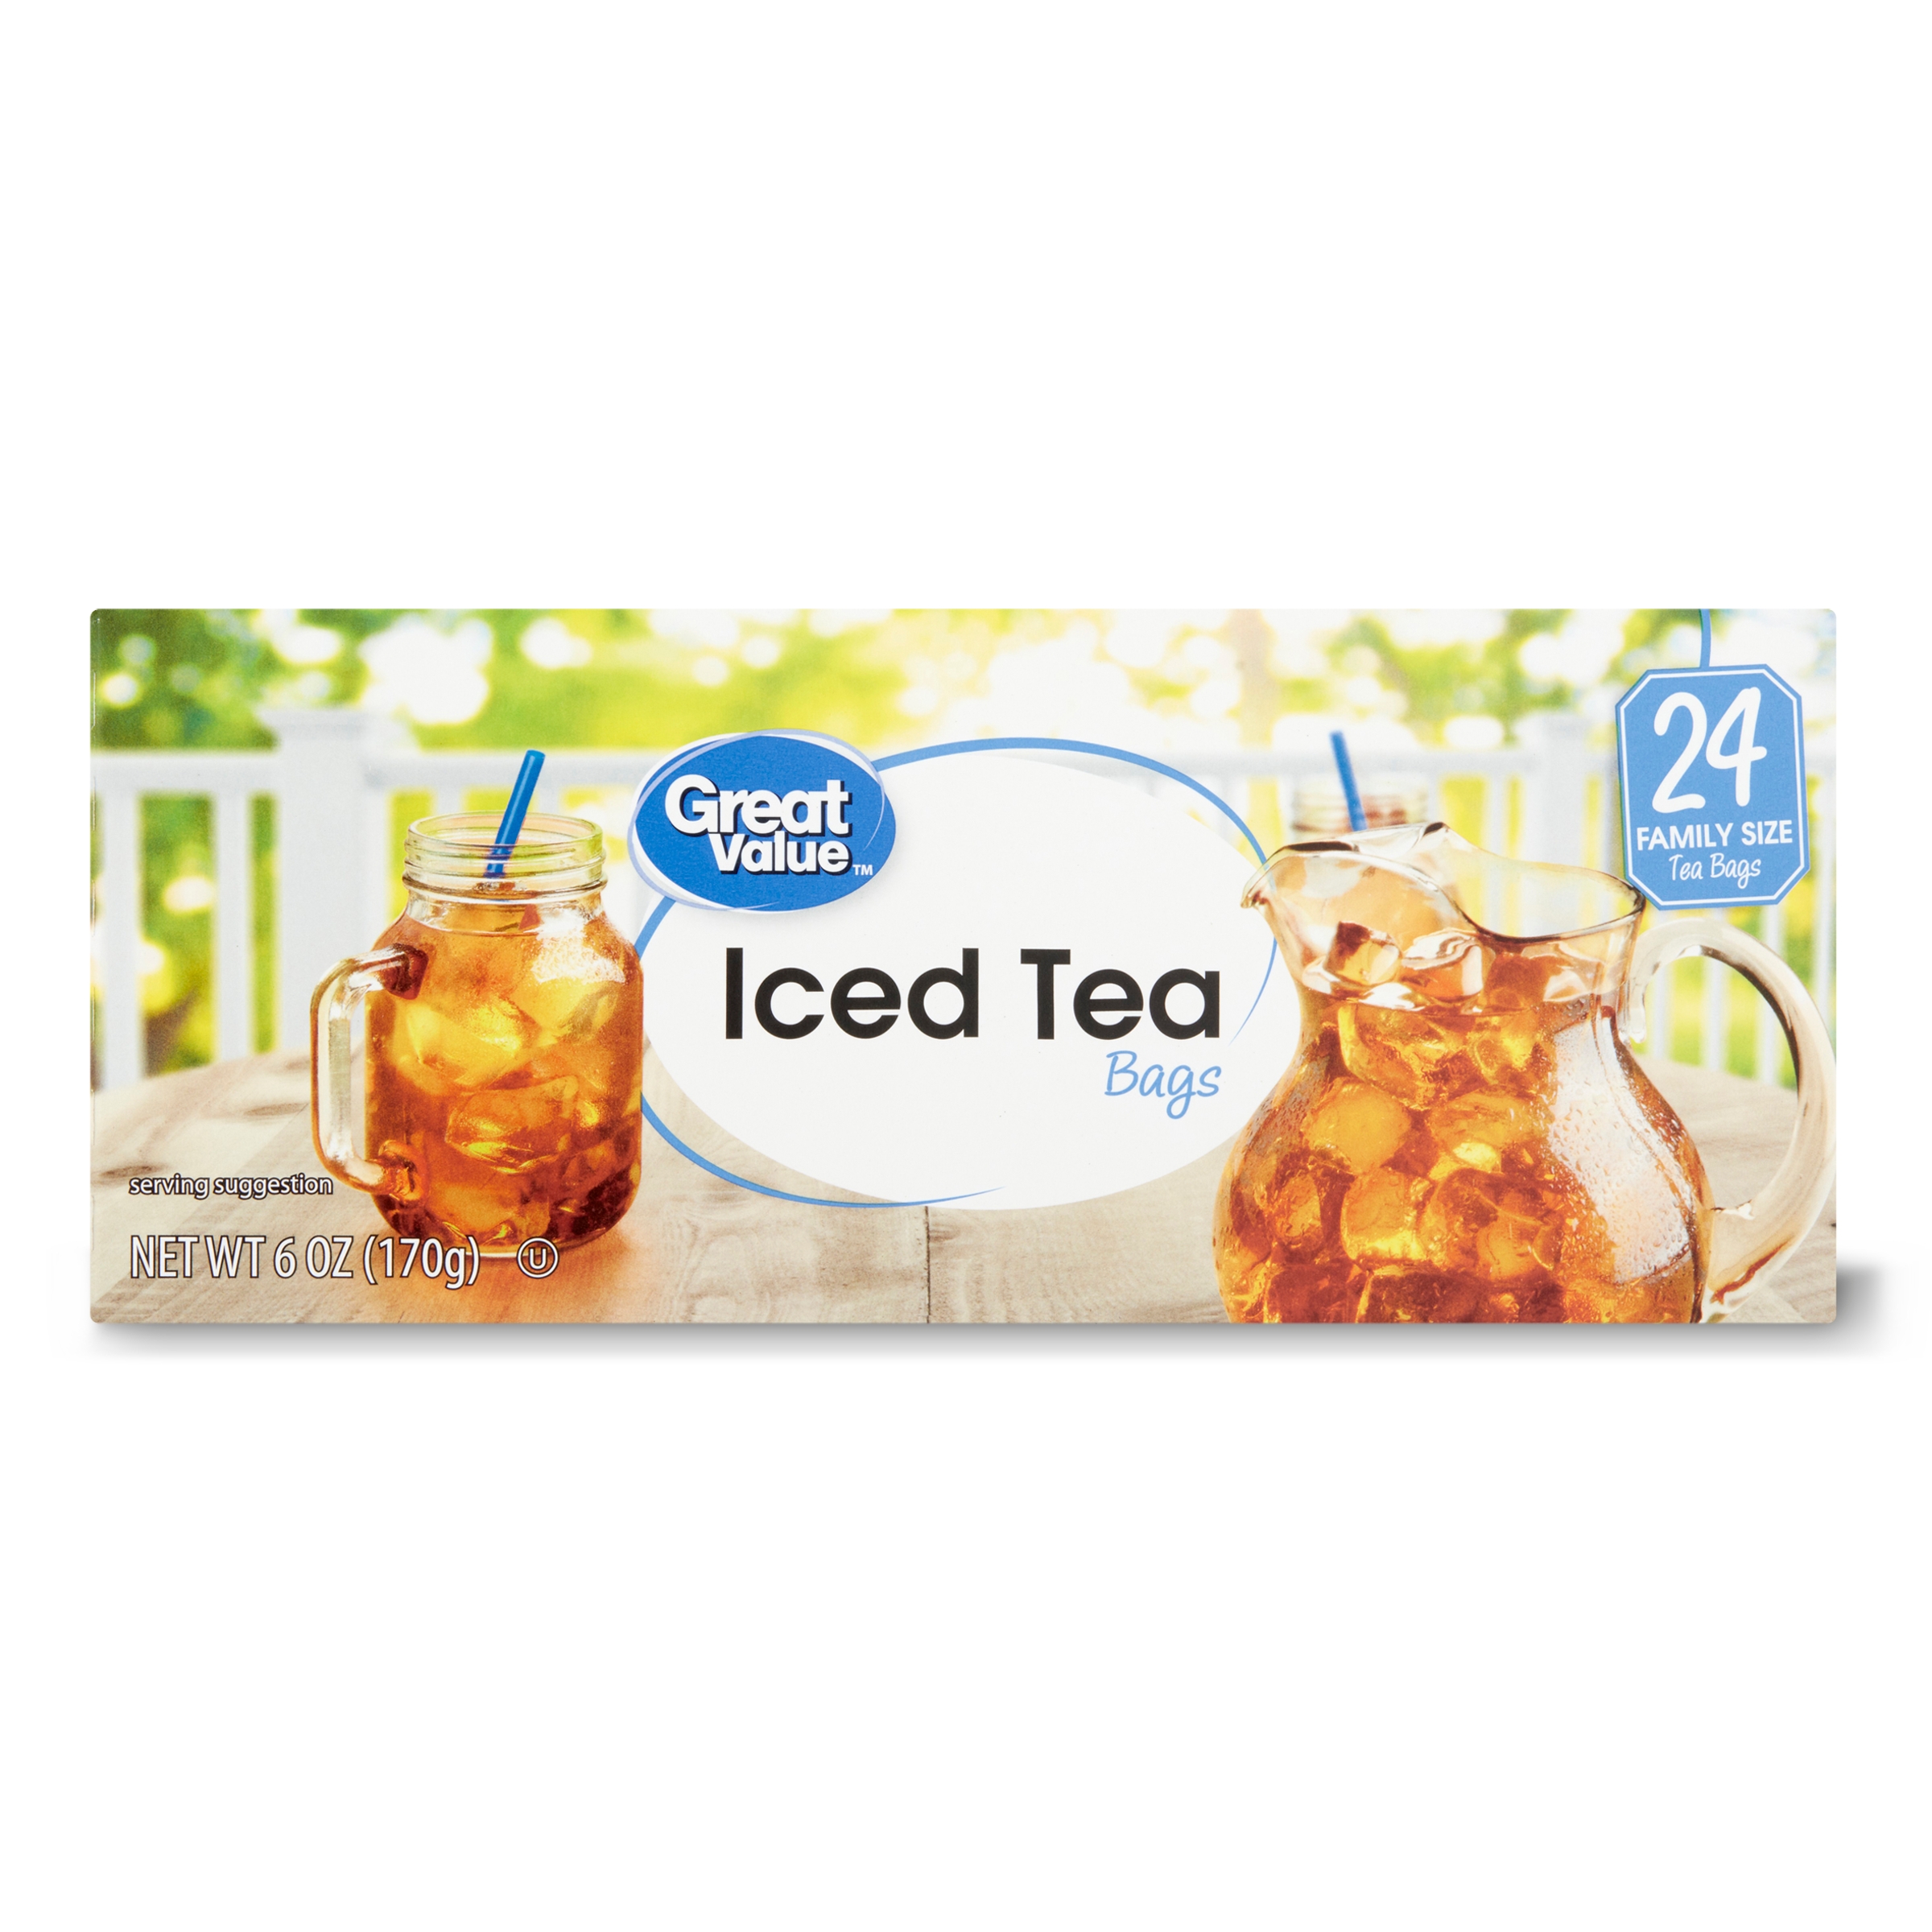 Great Value Iced Tea Bags Family Size, 24 Count, 6 oz - image 1 of 7